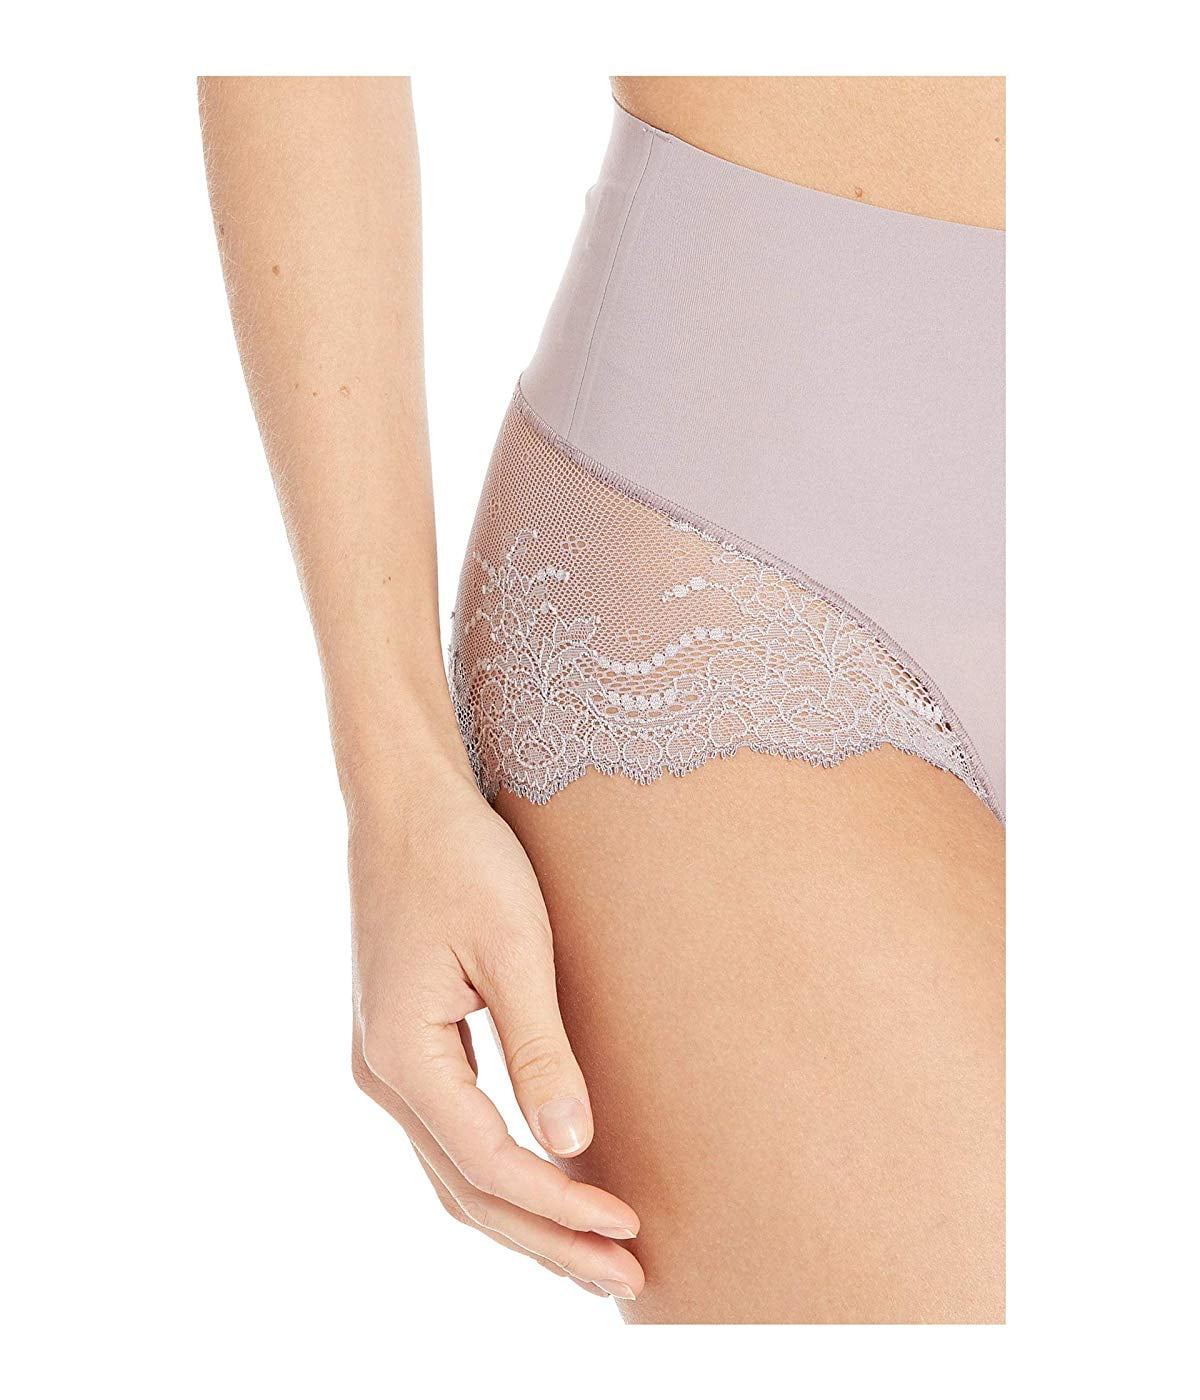 Undie-tectable lace support bikini panty